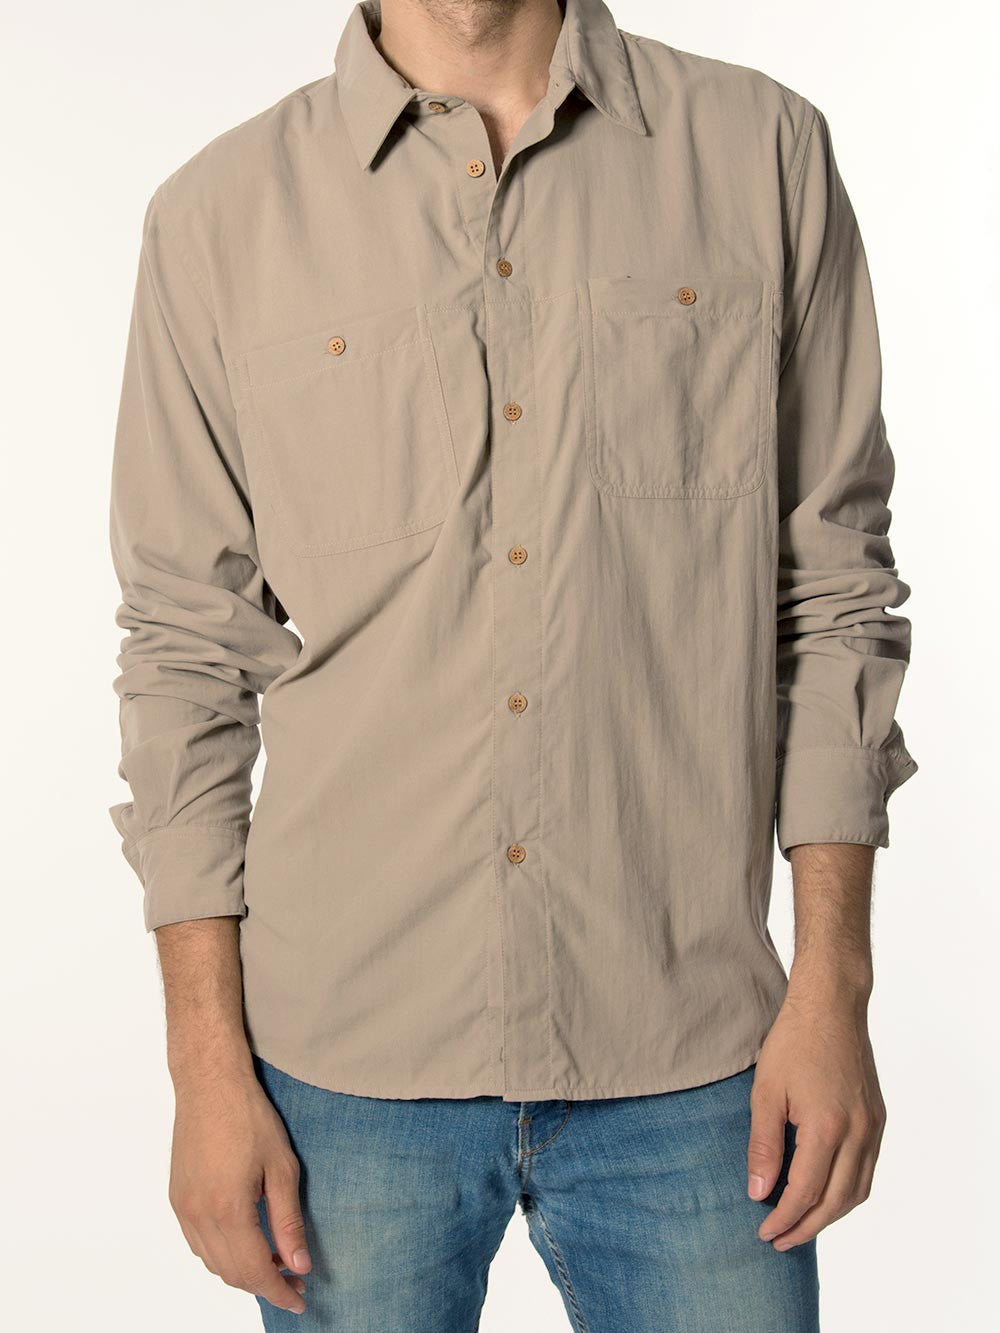 shirt with pocket